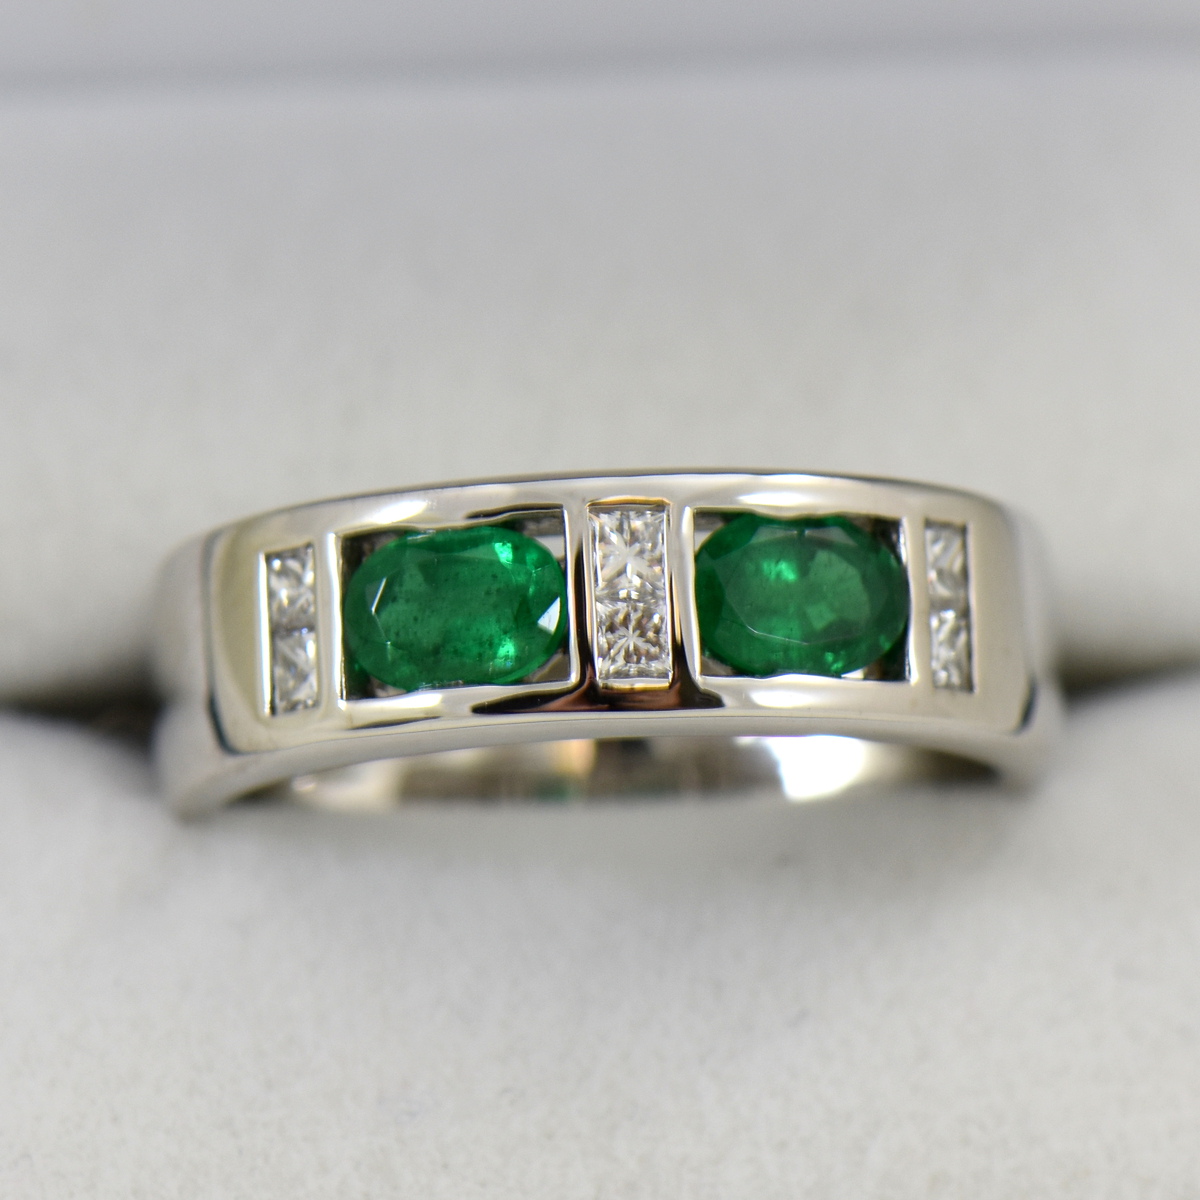 Buy Big Emerald Mens Natural Emerald Ring Unheated Untreated Rich Green Emerald  Ring Afghanistan Emerald Ring Afghani Emerald Ring Shia Rings Online in  India - Etsy